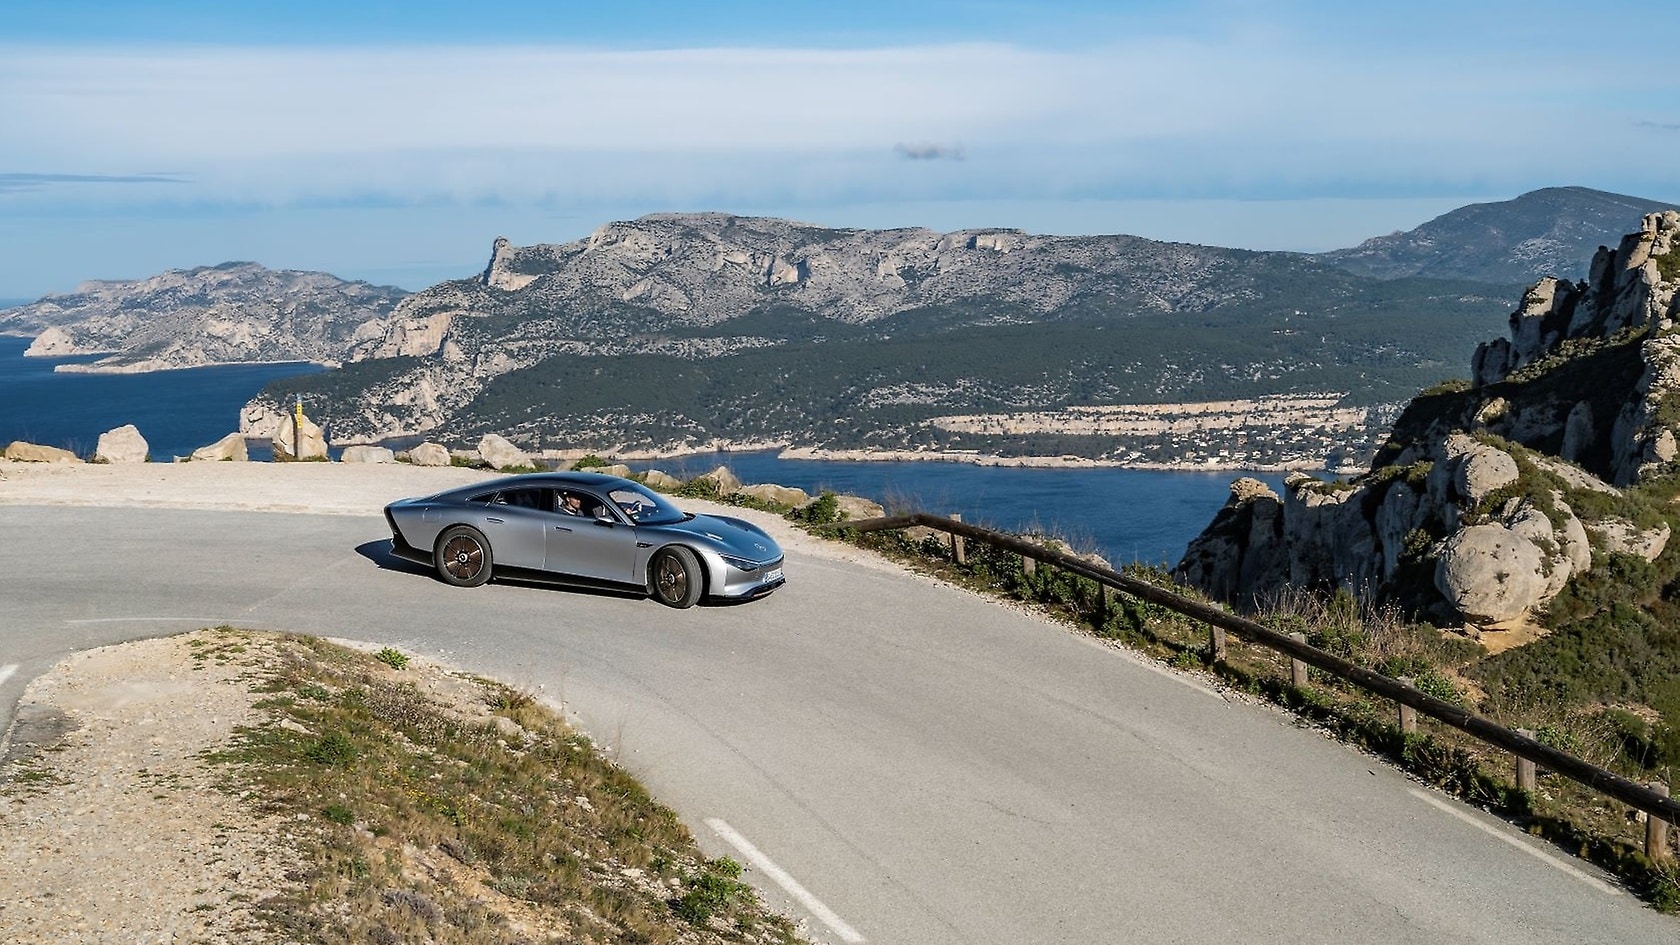 Travelling from Sindelfingen across the Swiss Alps and Northern Italy, to its destination of Cassis on the Côte d'Azur, the Vision EQXX effortlessly covered more than 1,000 km in everyday traffic, on a single battery charge.